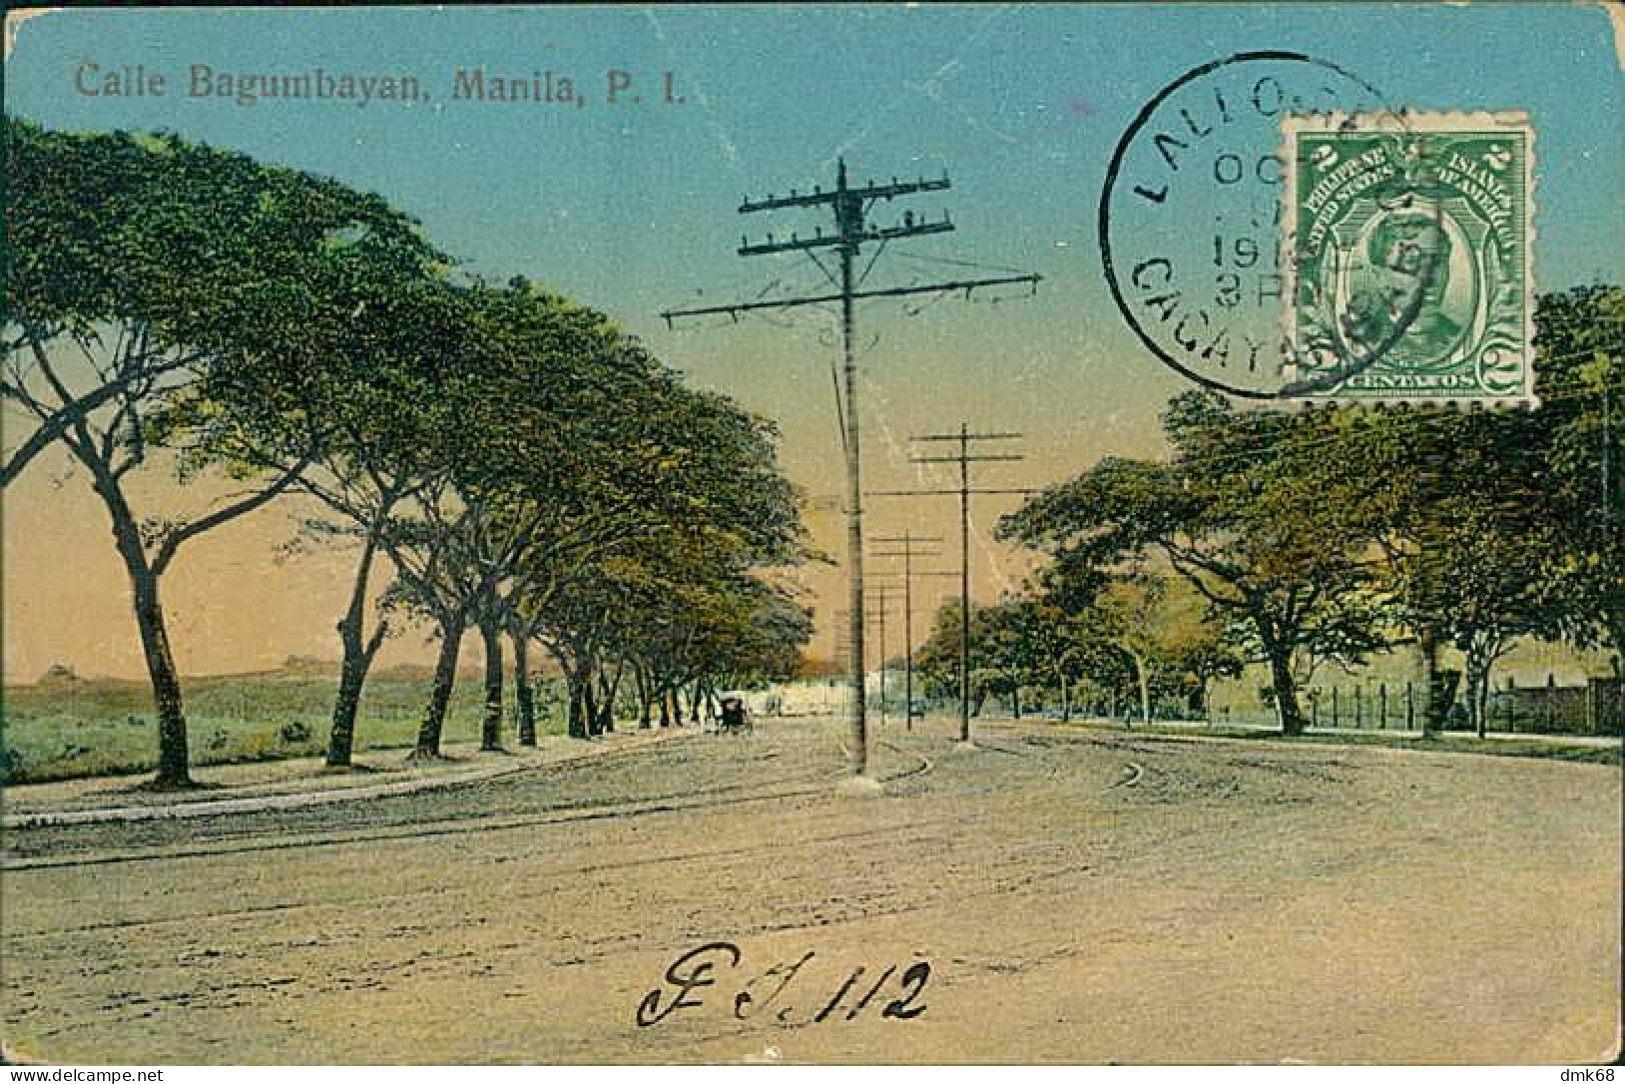 PHILIPPINES - MANILA - CALLE BAGUMBAYAN - PUB. BY CAMERA SUPPLY COMPANY - MAILED 1918 / STAMP (18345) - Filipinas